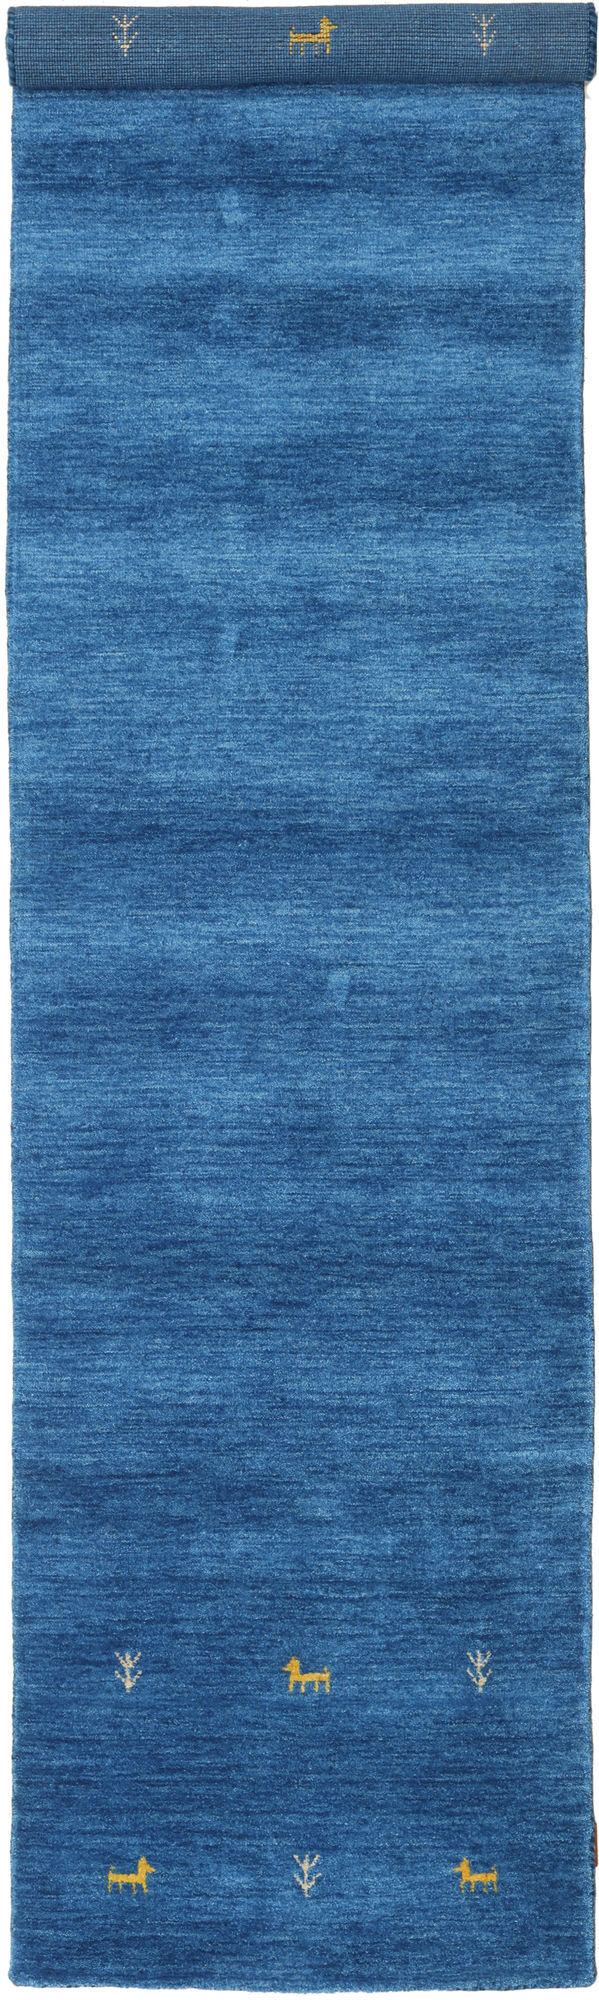 RugVista Gabbeh loom Two Lines Tappeto - Blu 80x450